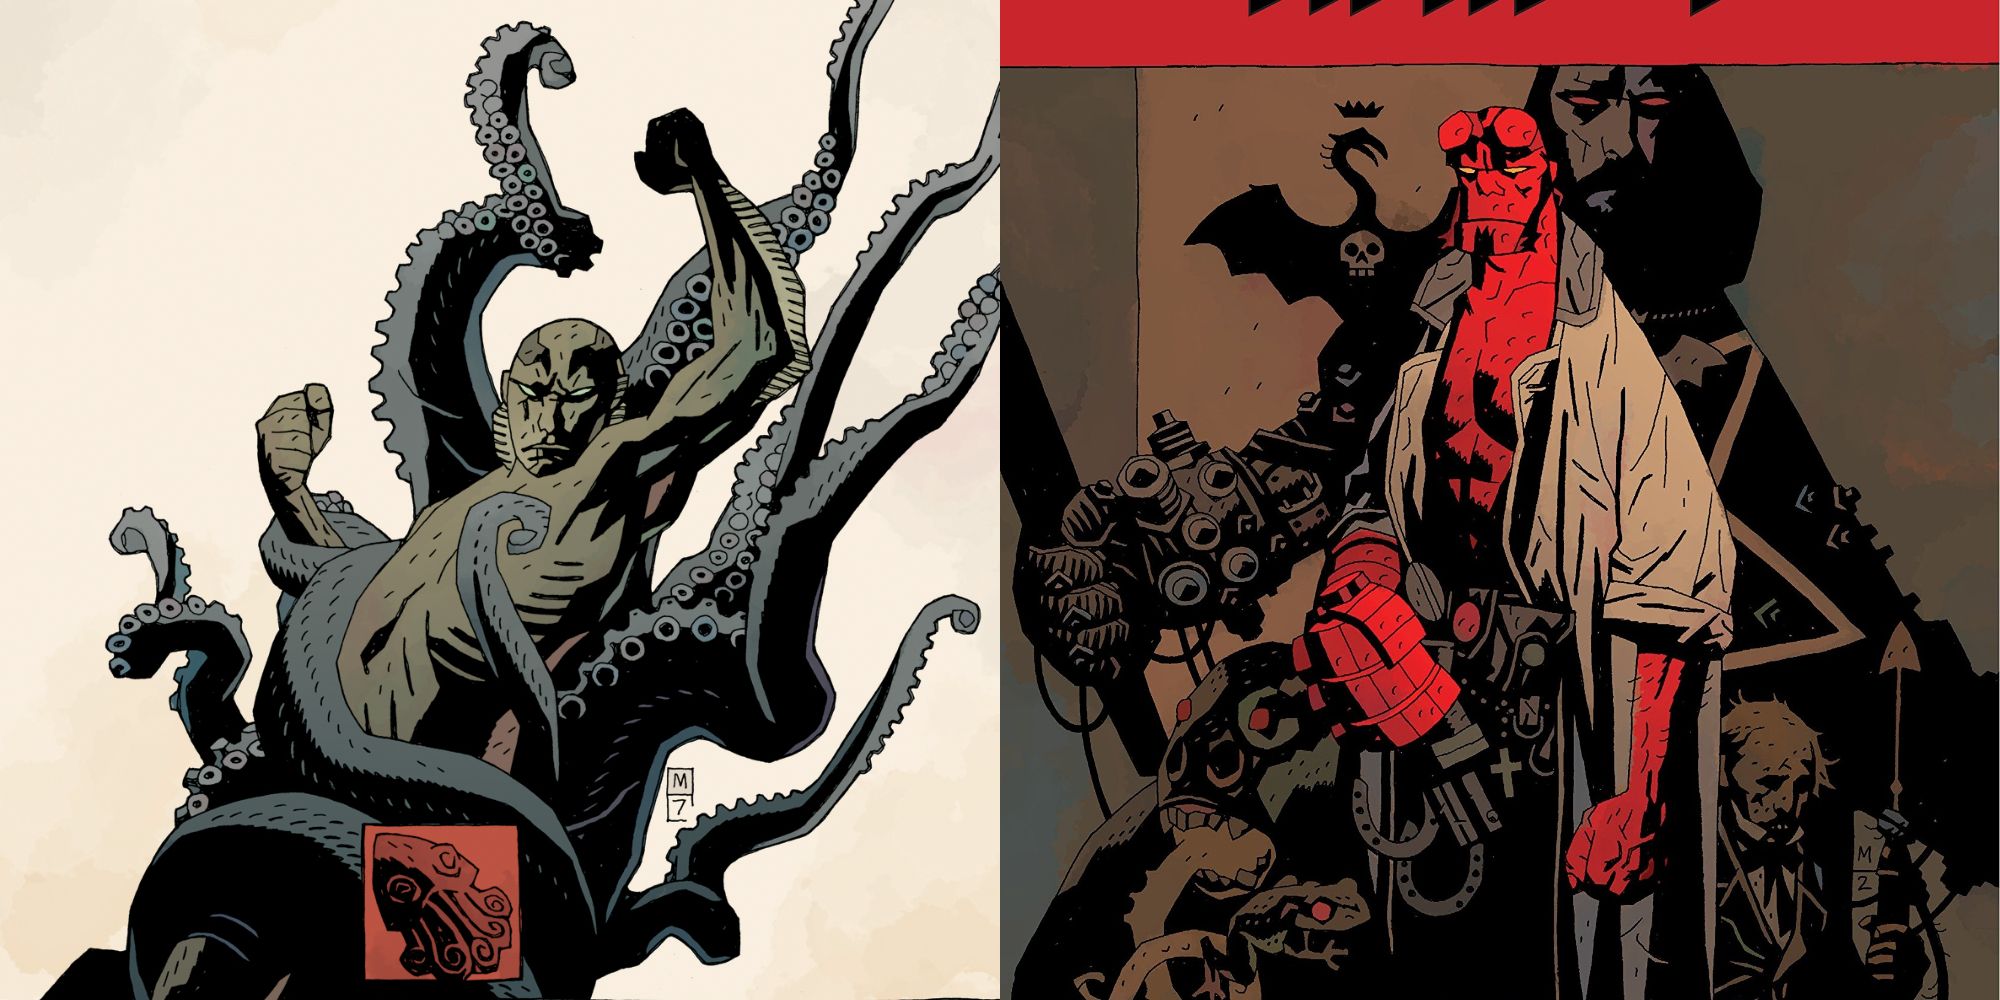 Split image showing Abe Sapien and Hellboy in Marvel Comics.